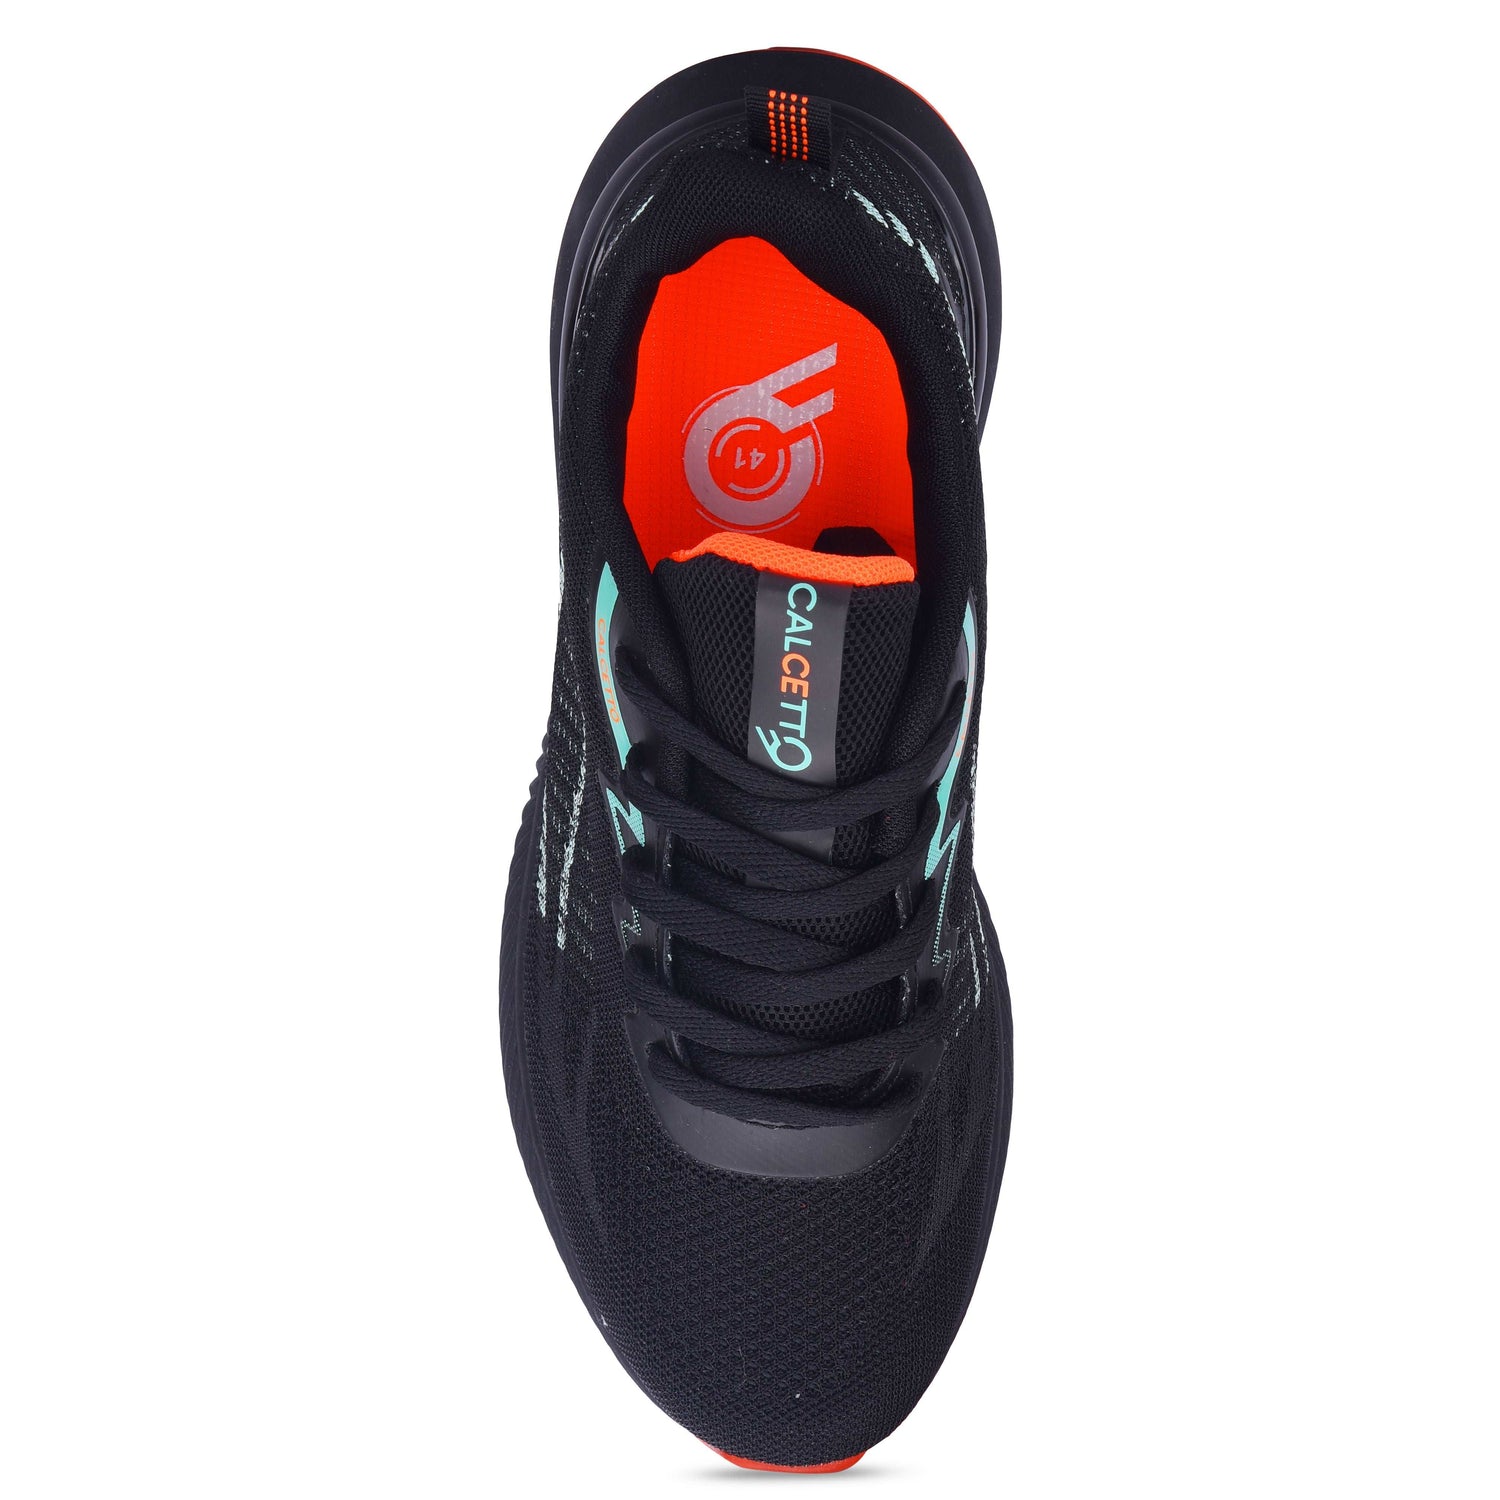 Calcetto CLT-0987 Black Green Running Sports Shoe For Men